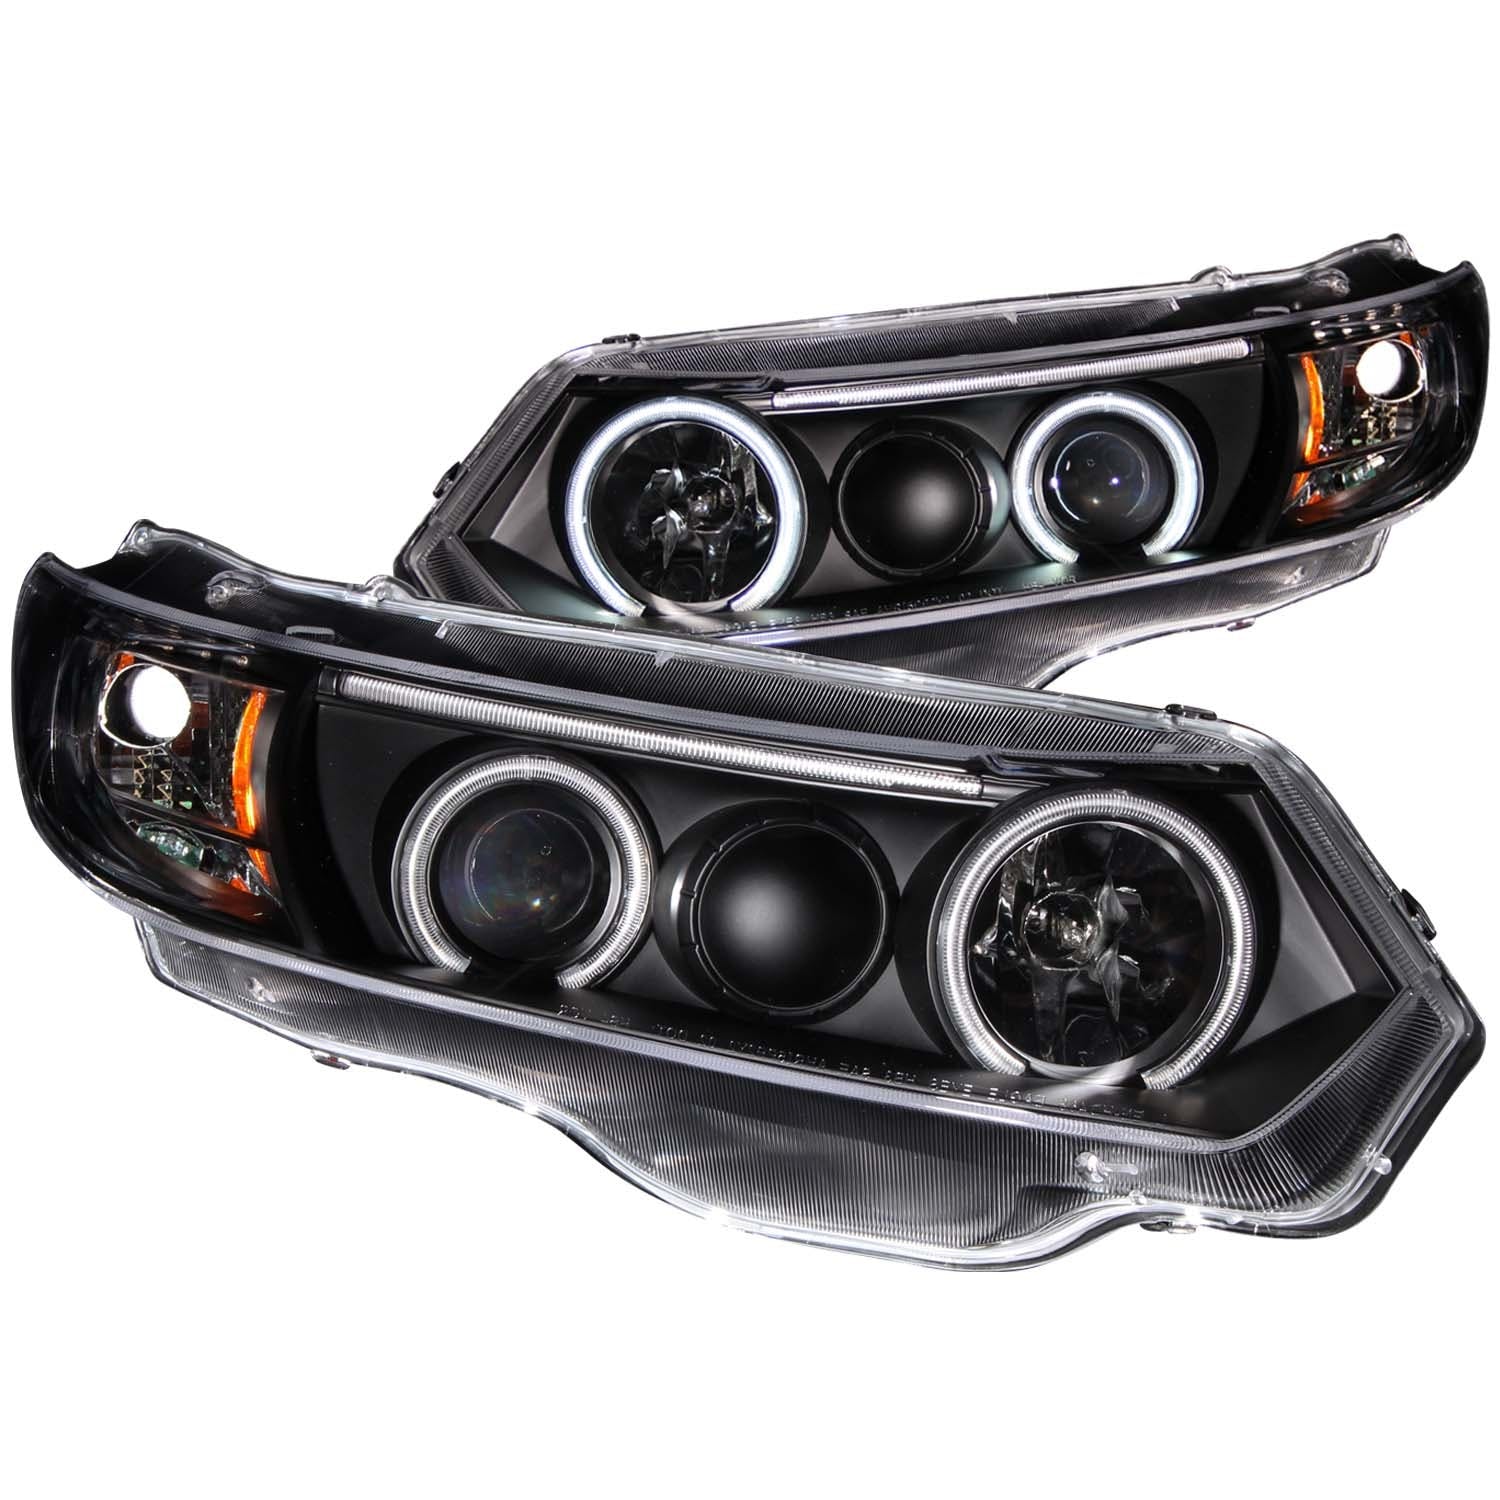 AnzoUSA 121062 Projector Headlights with Halo Black (SMD LED)